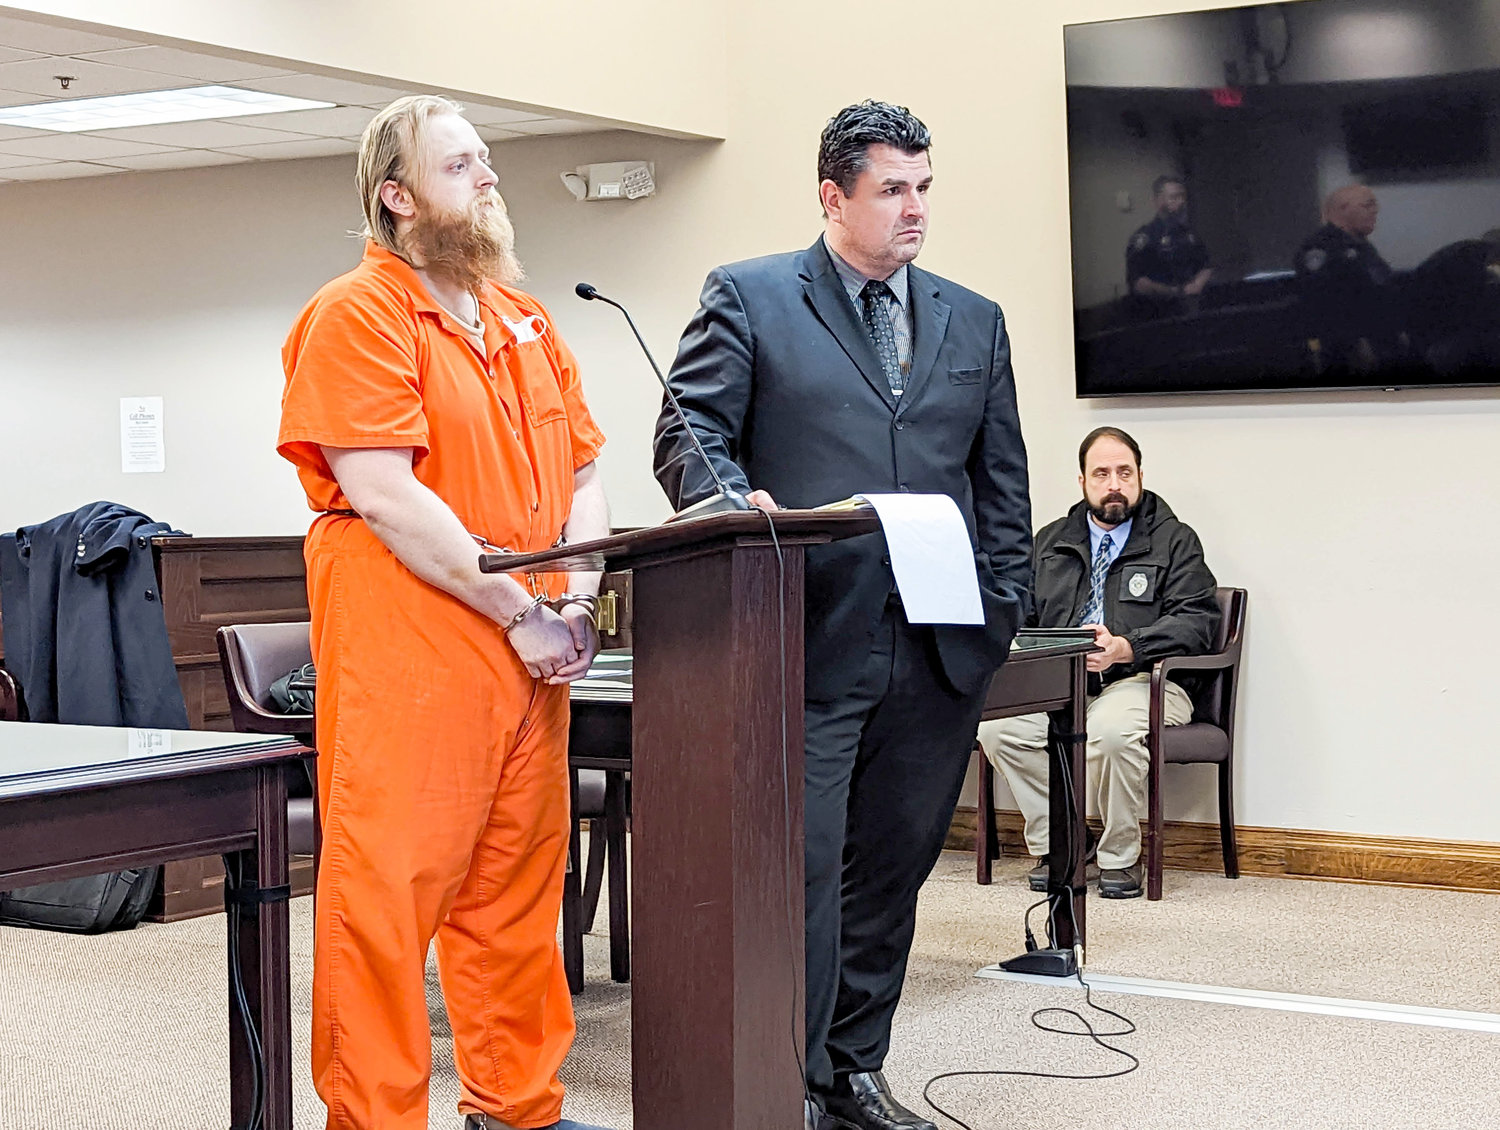 Matthew Westcott is scheduled to go to trial in Oneida County Court next week in the shooting death of his brother, James Westcott, in Taberg in September 2021. Westcott’s other brother, and former co-defendant, Micheal Westcott, is now expected to testify against him.